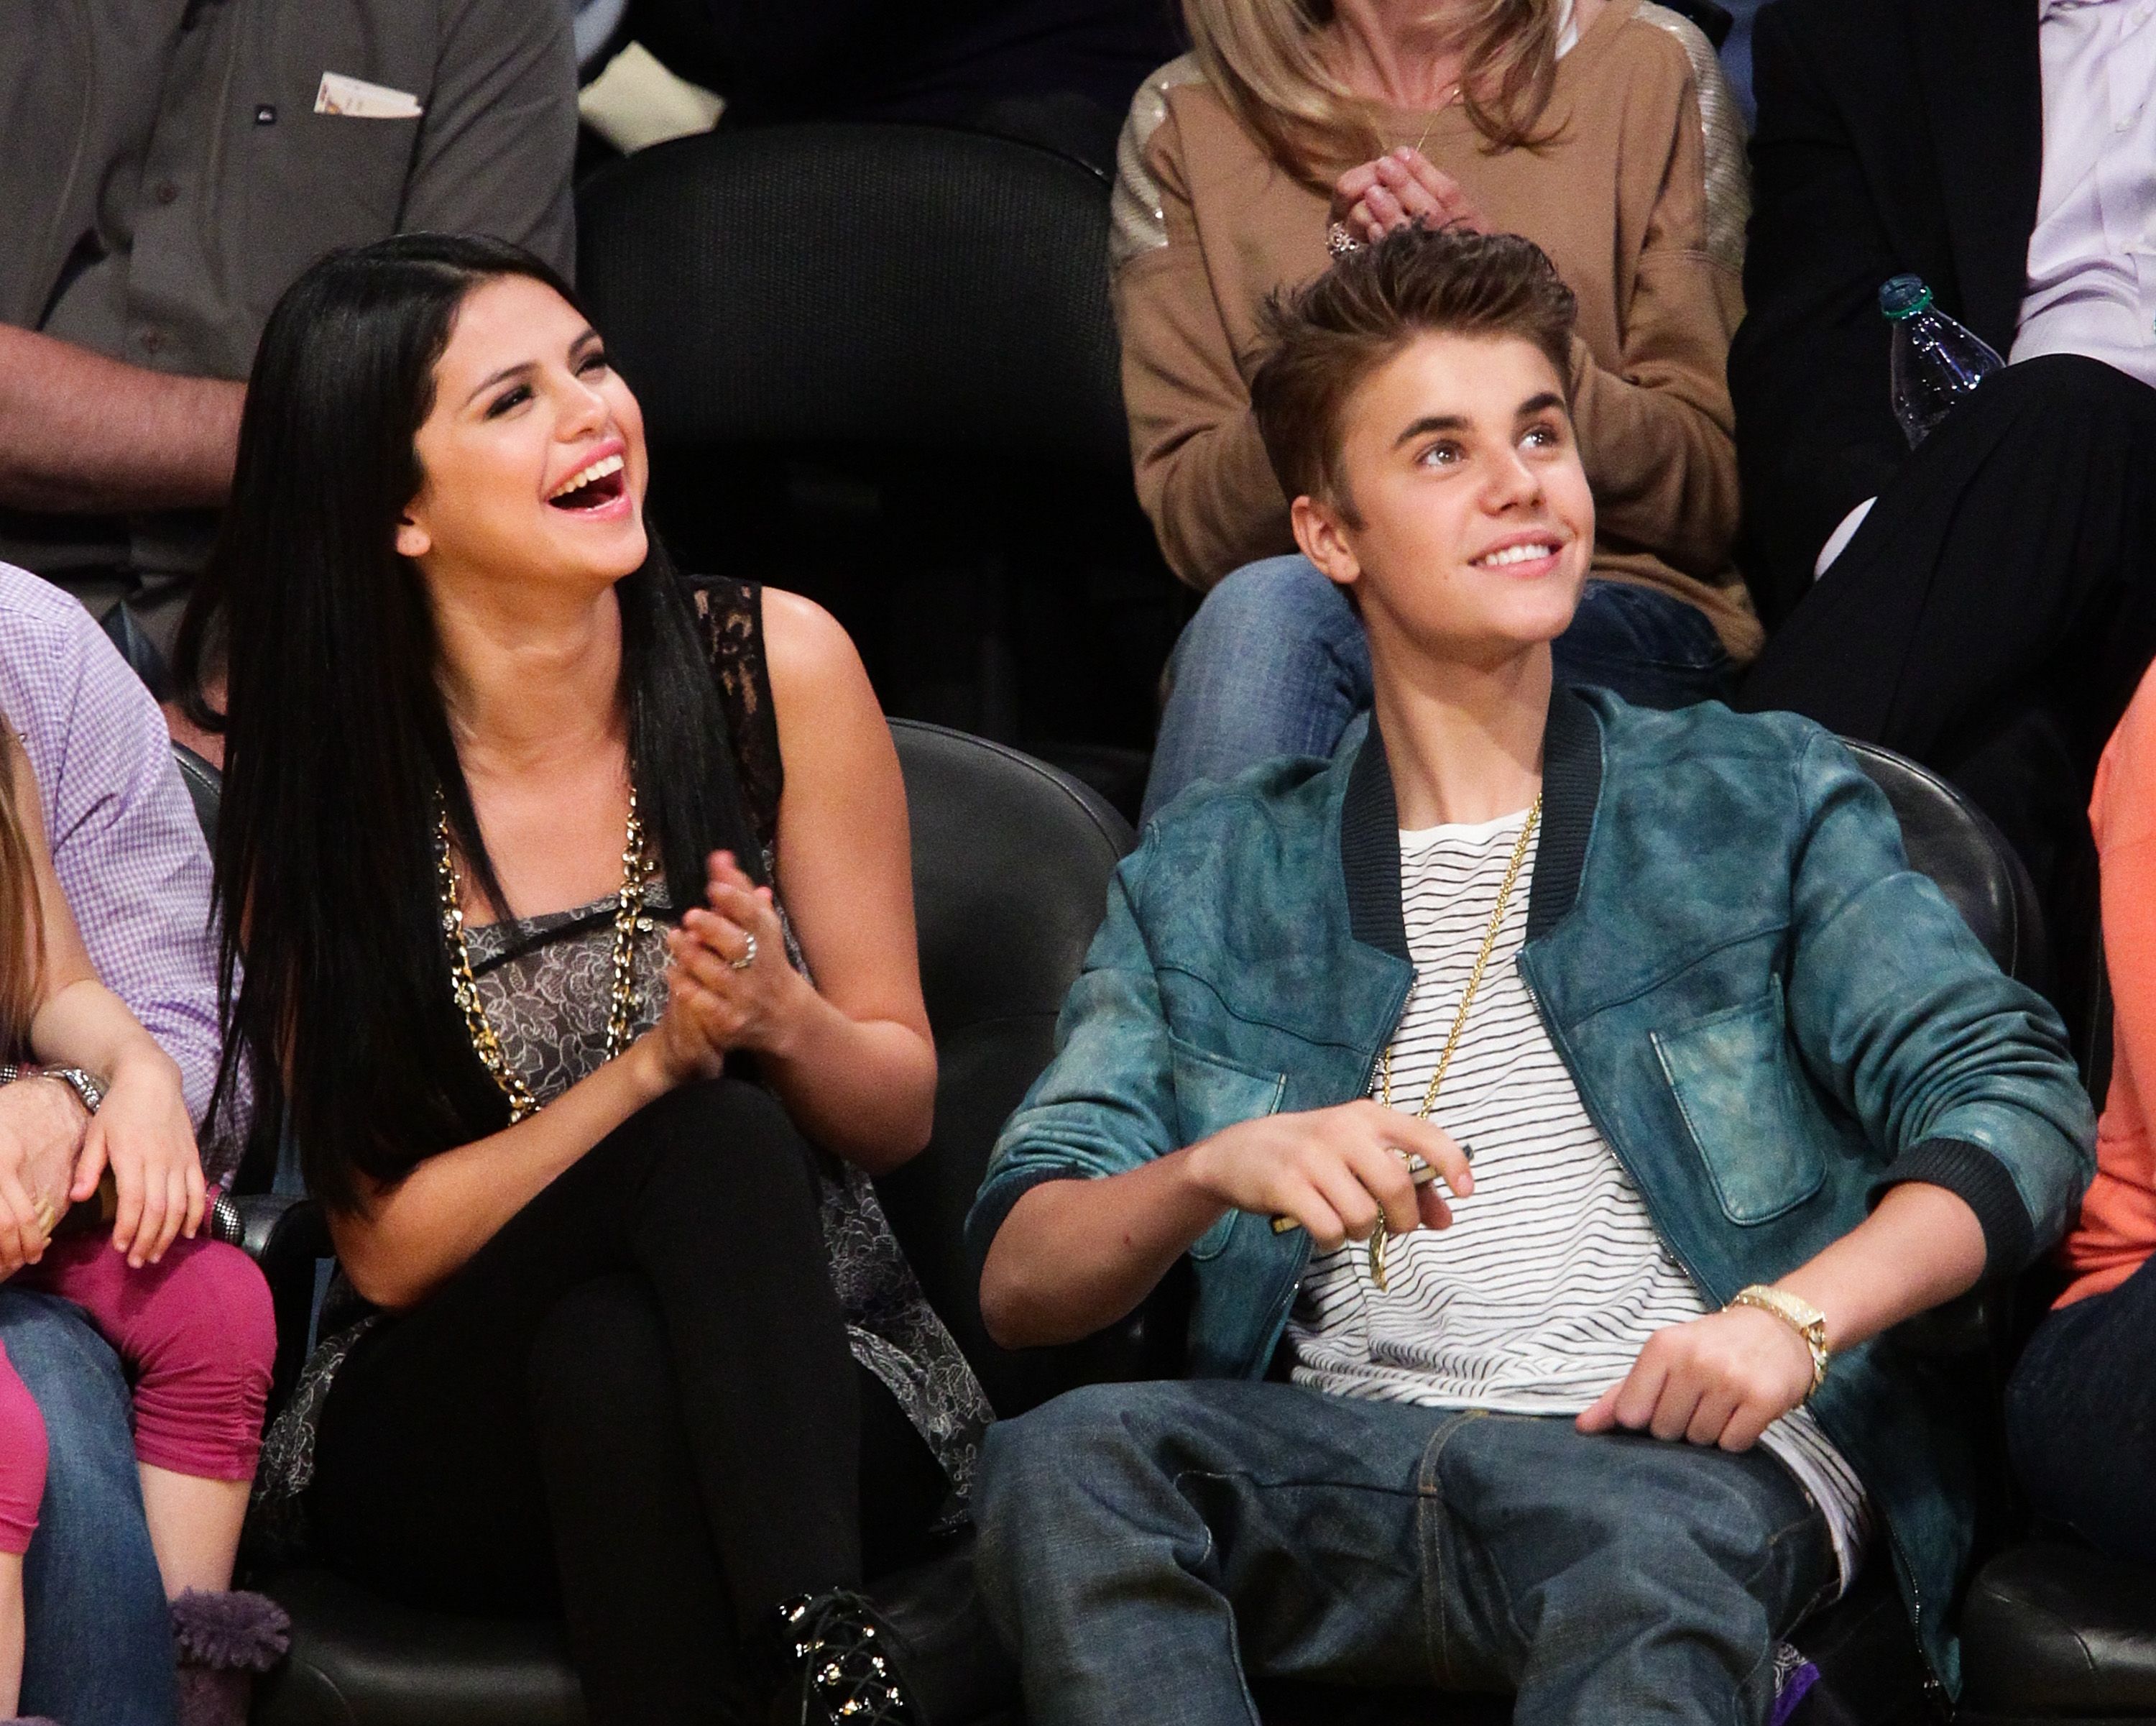 Justin Bieber Still Has His Selena Gomez Tattoo Even After Getting Engaged  and Its AWKWARD